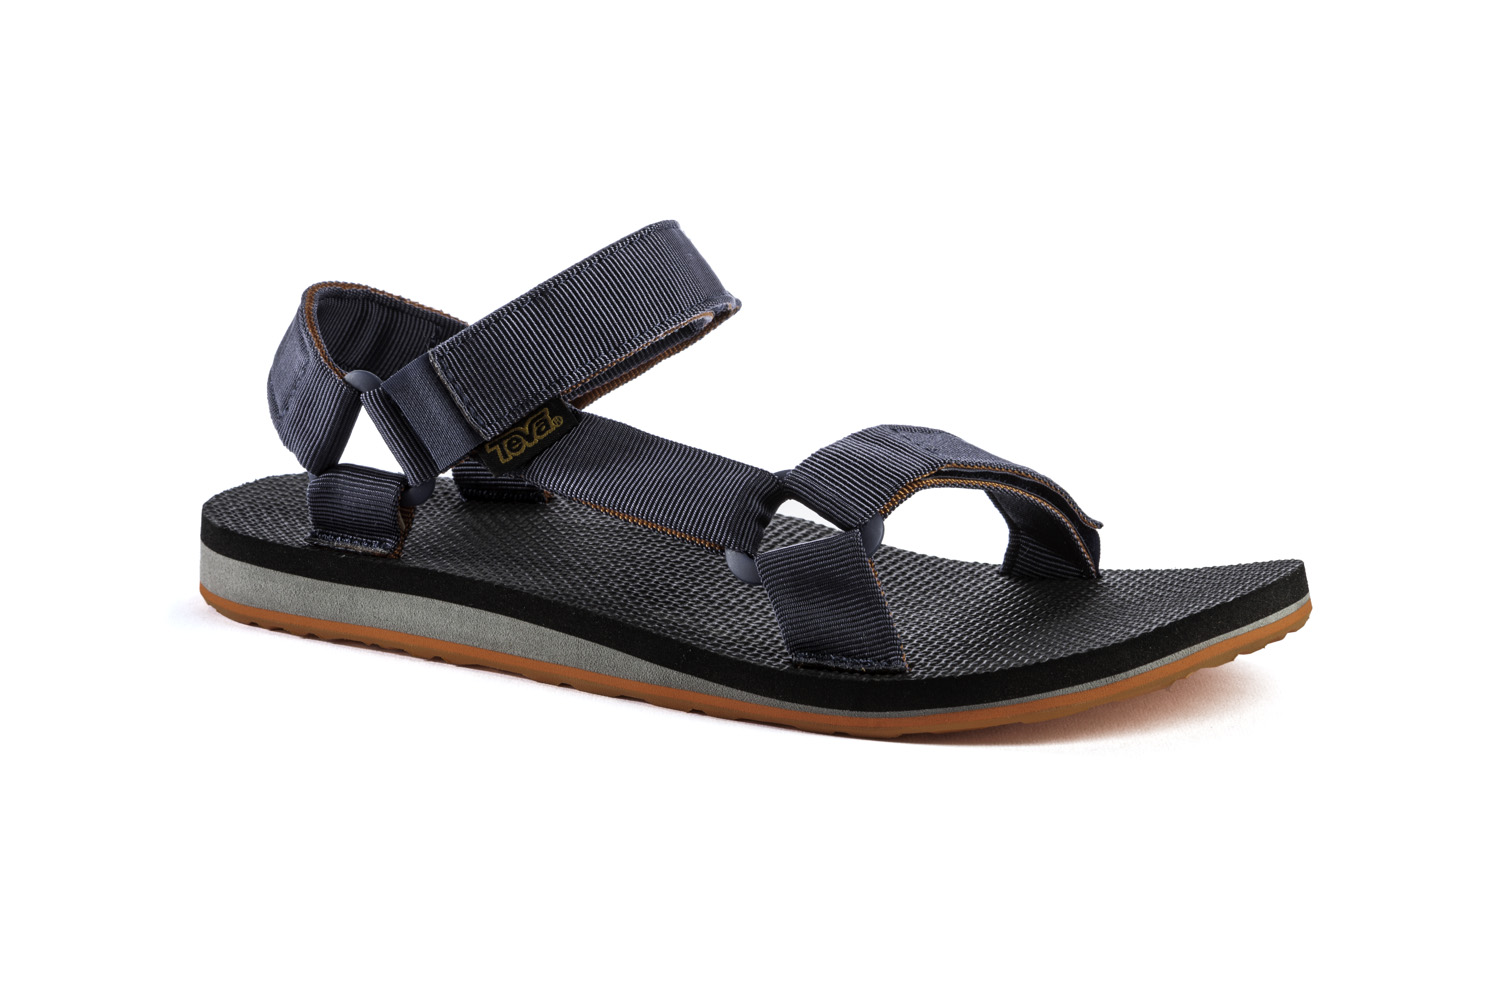 Teva relaunches its Original scandals just in time for summer @teva ...